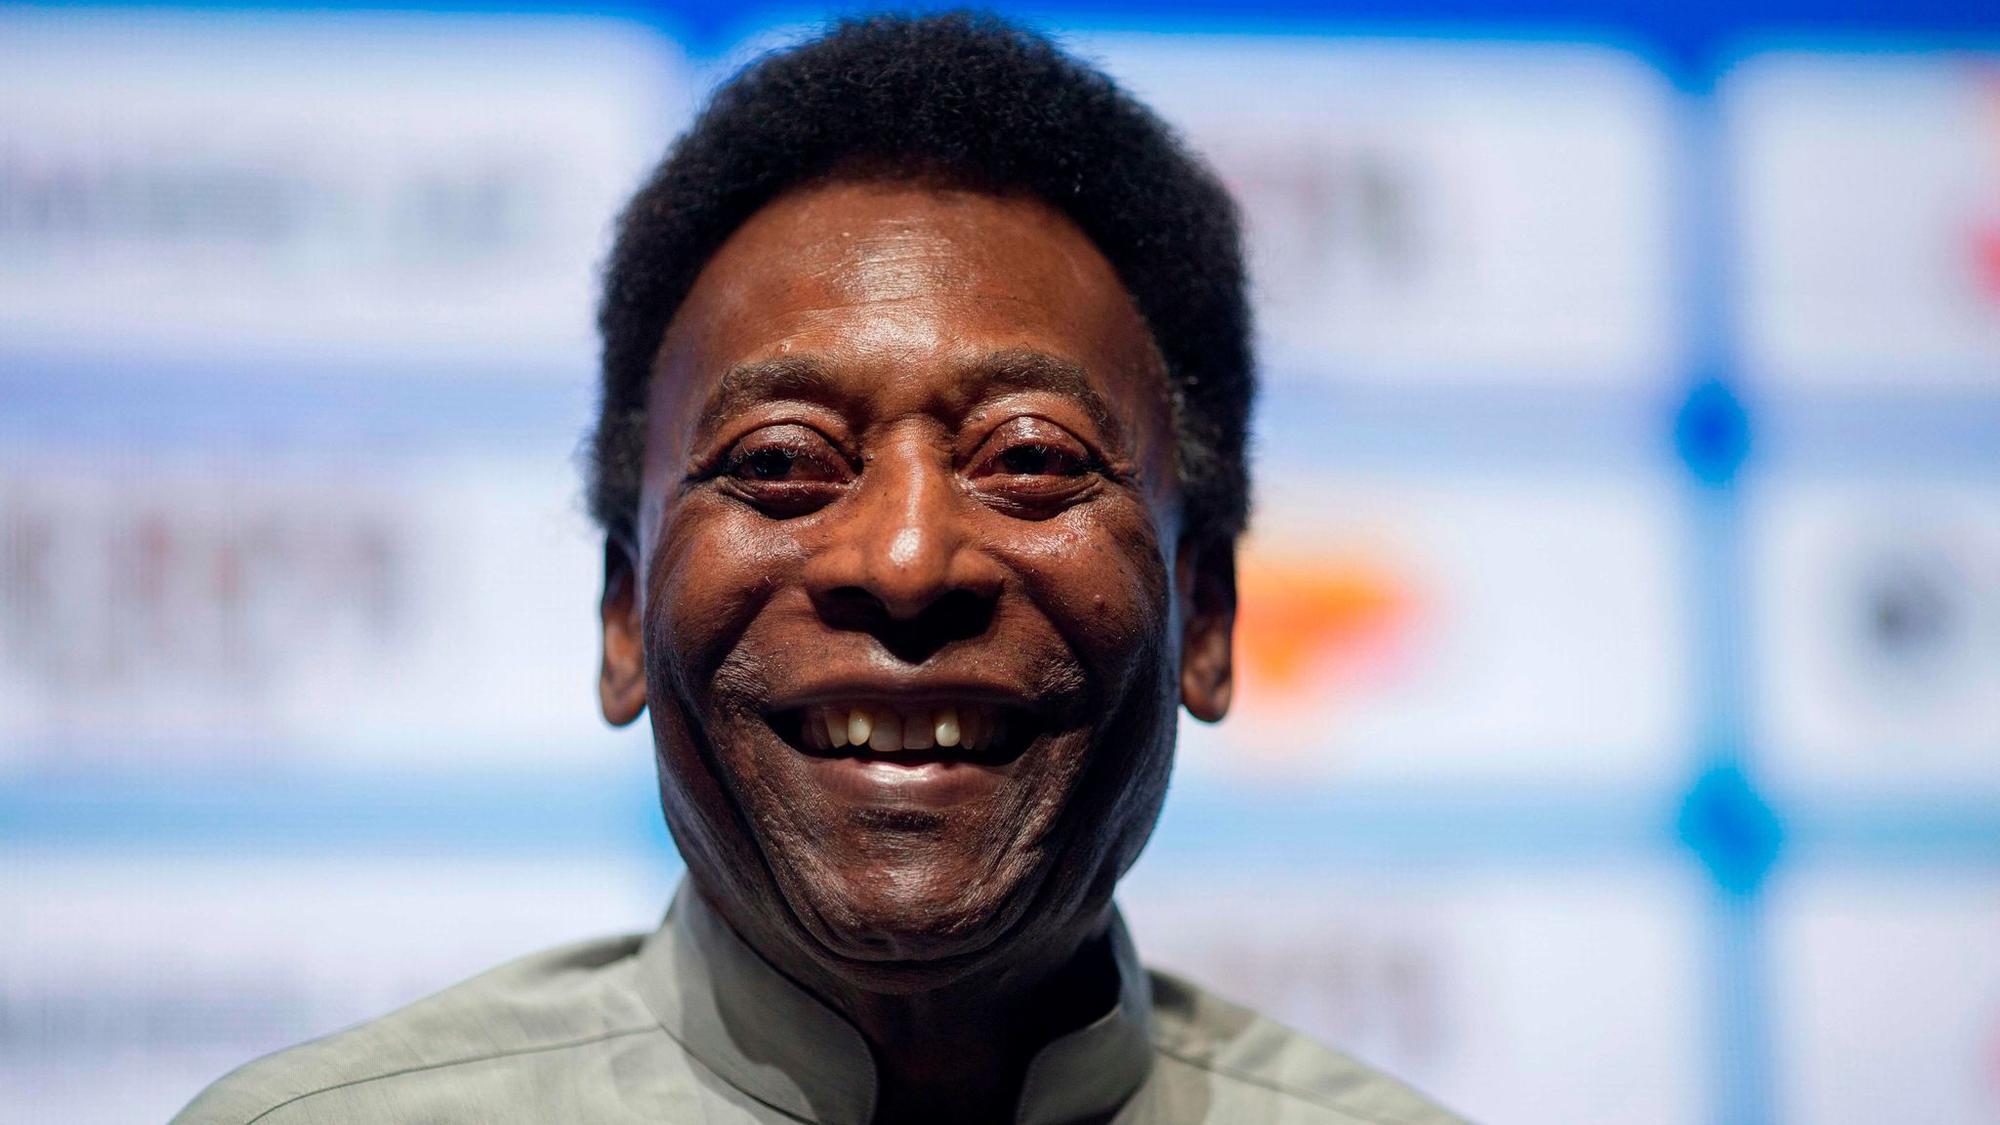 Soccer legend Pele is hospitalized after collapsing from exhaustion